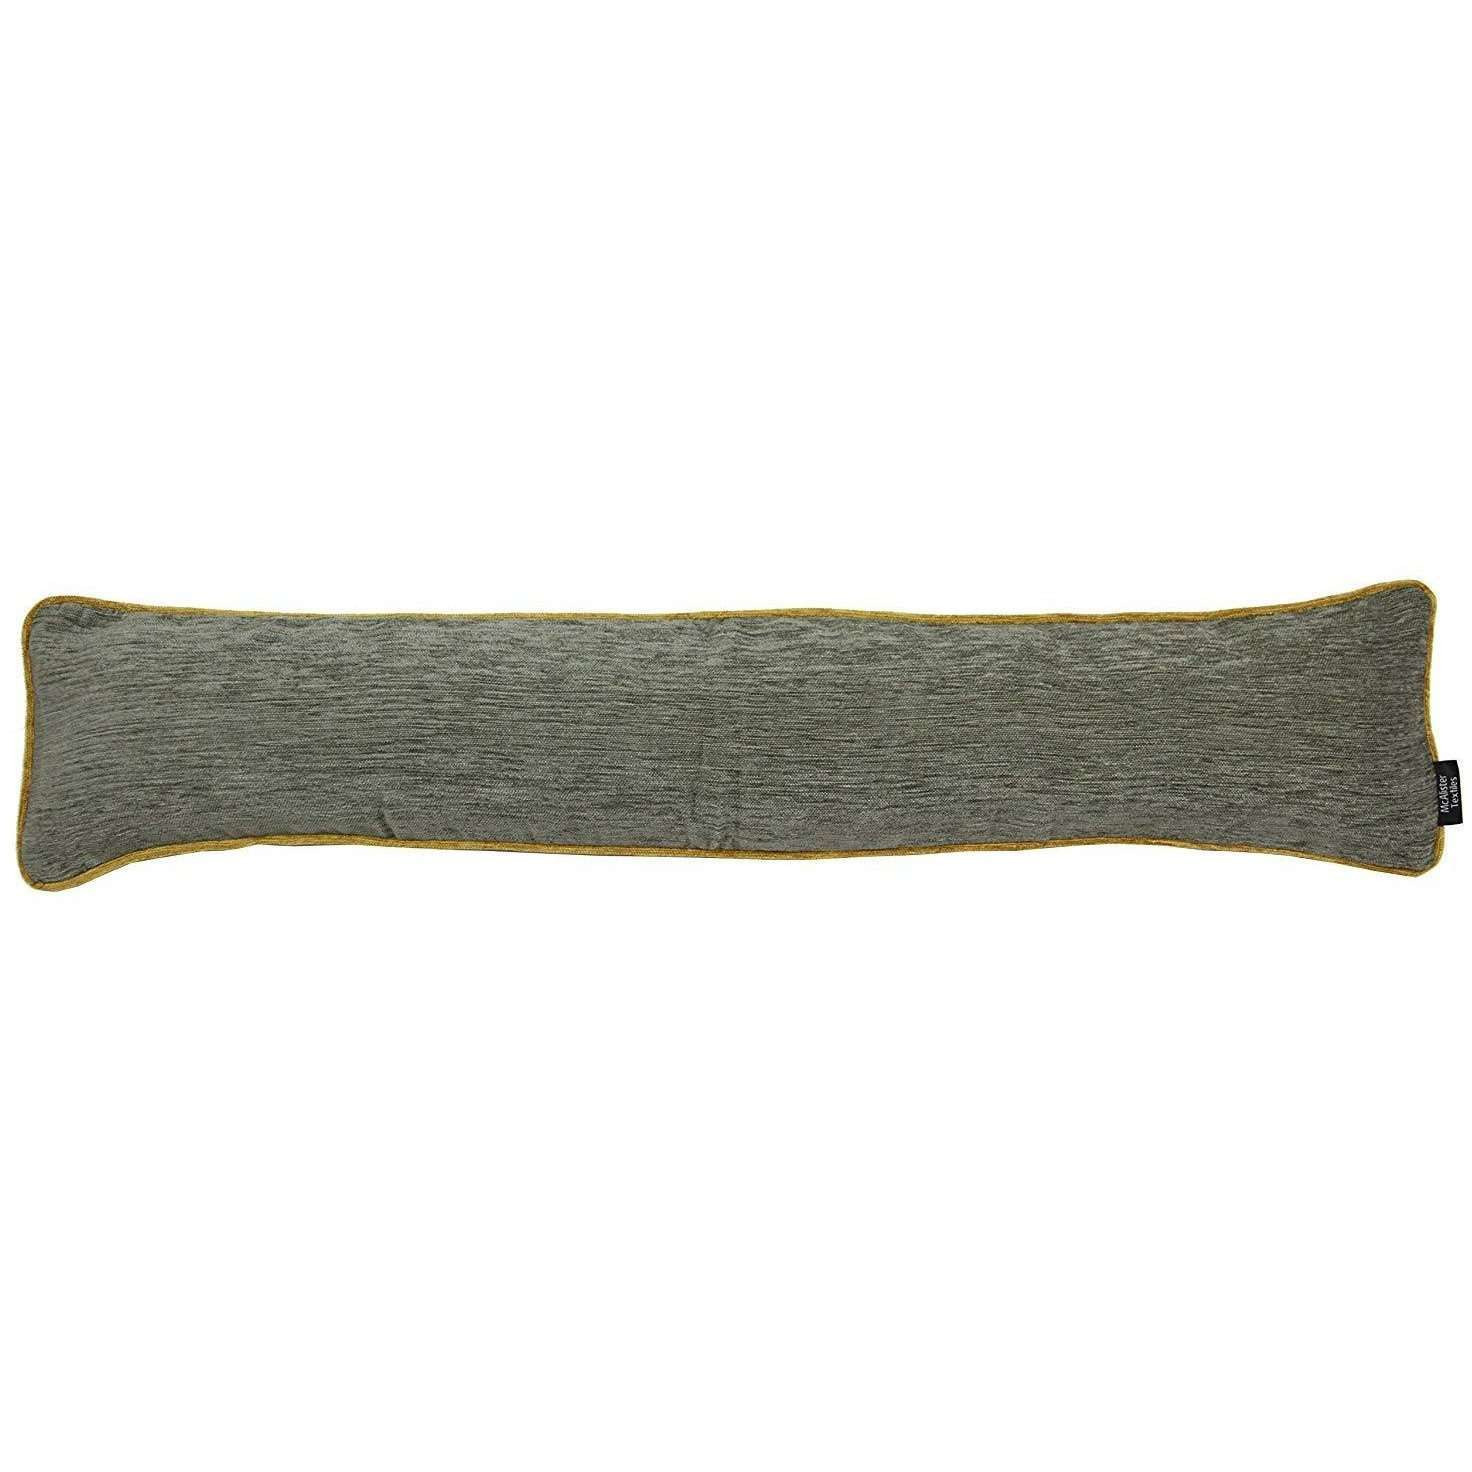 Plain Chenille Contrast Piped Grey + Yellow Draught Excluder, 18cm x 80cm